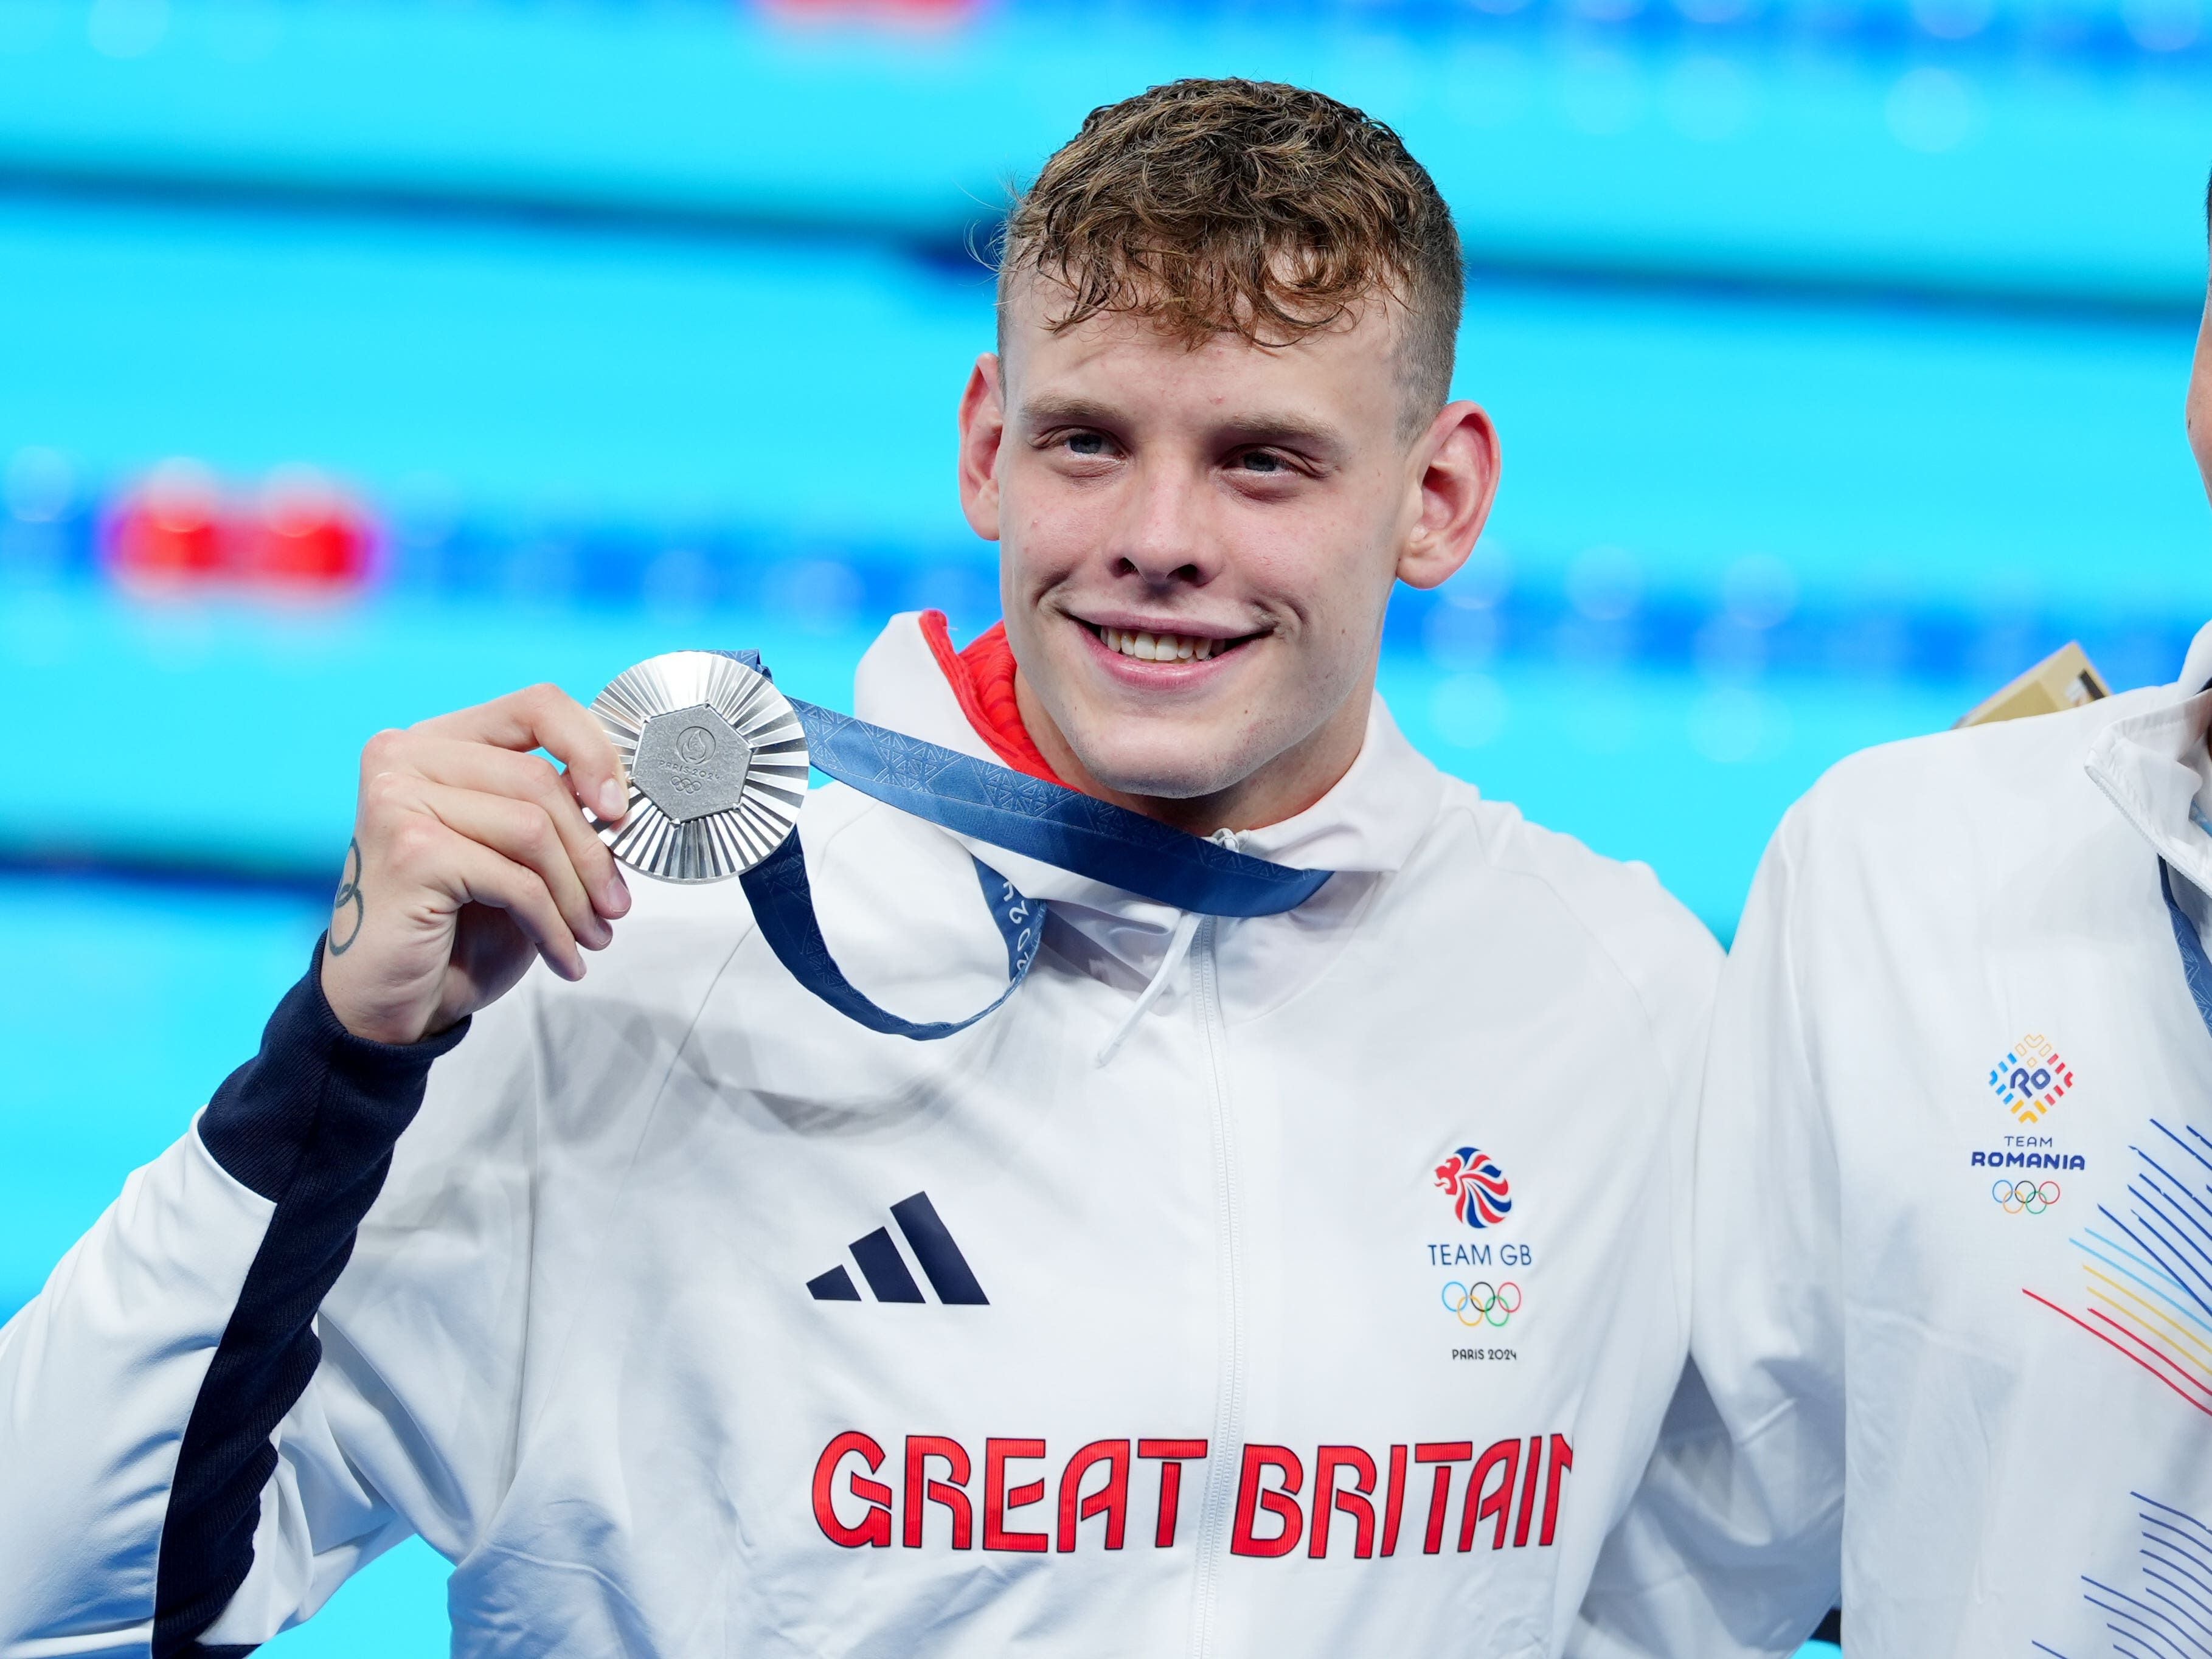 I thought I’d got it – Matt Richards after narrowly missing out on swimming gold